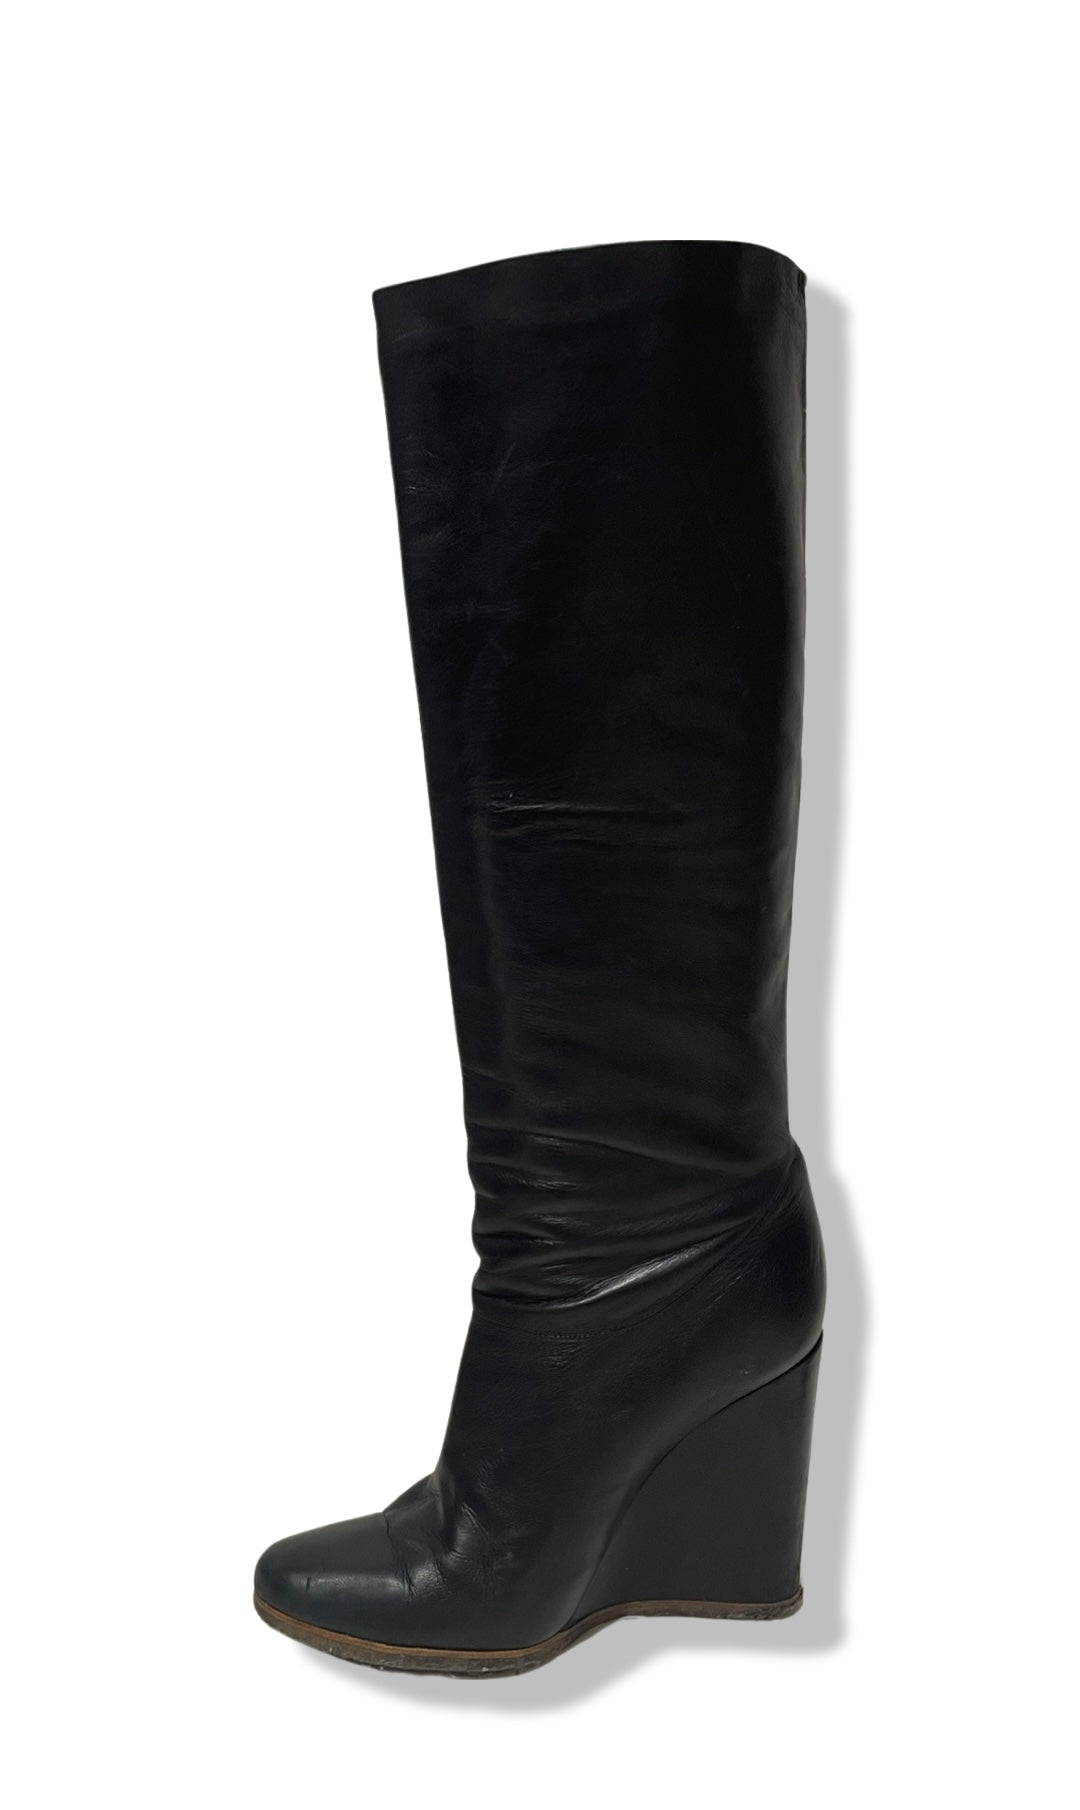 High leather boots by Lanvin.